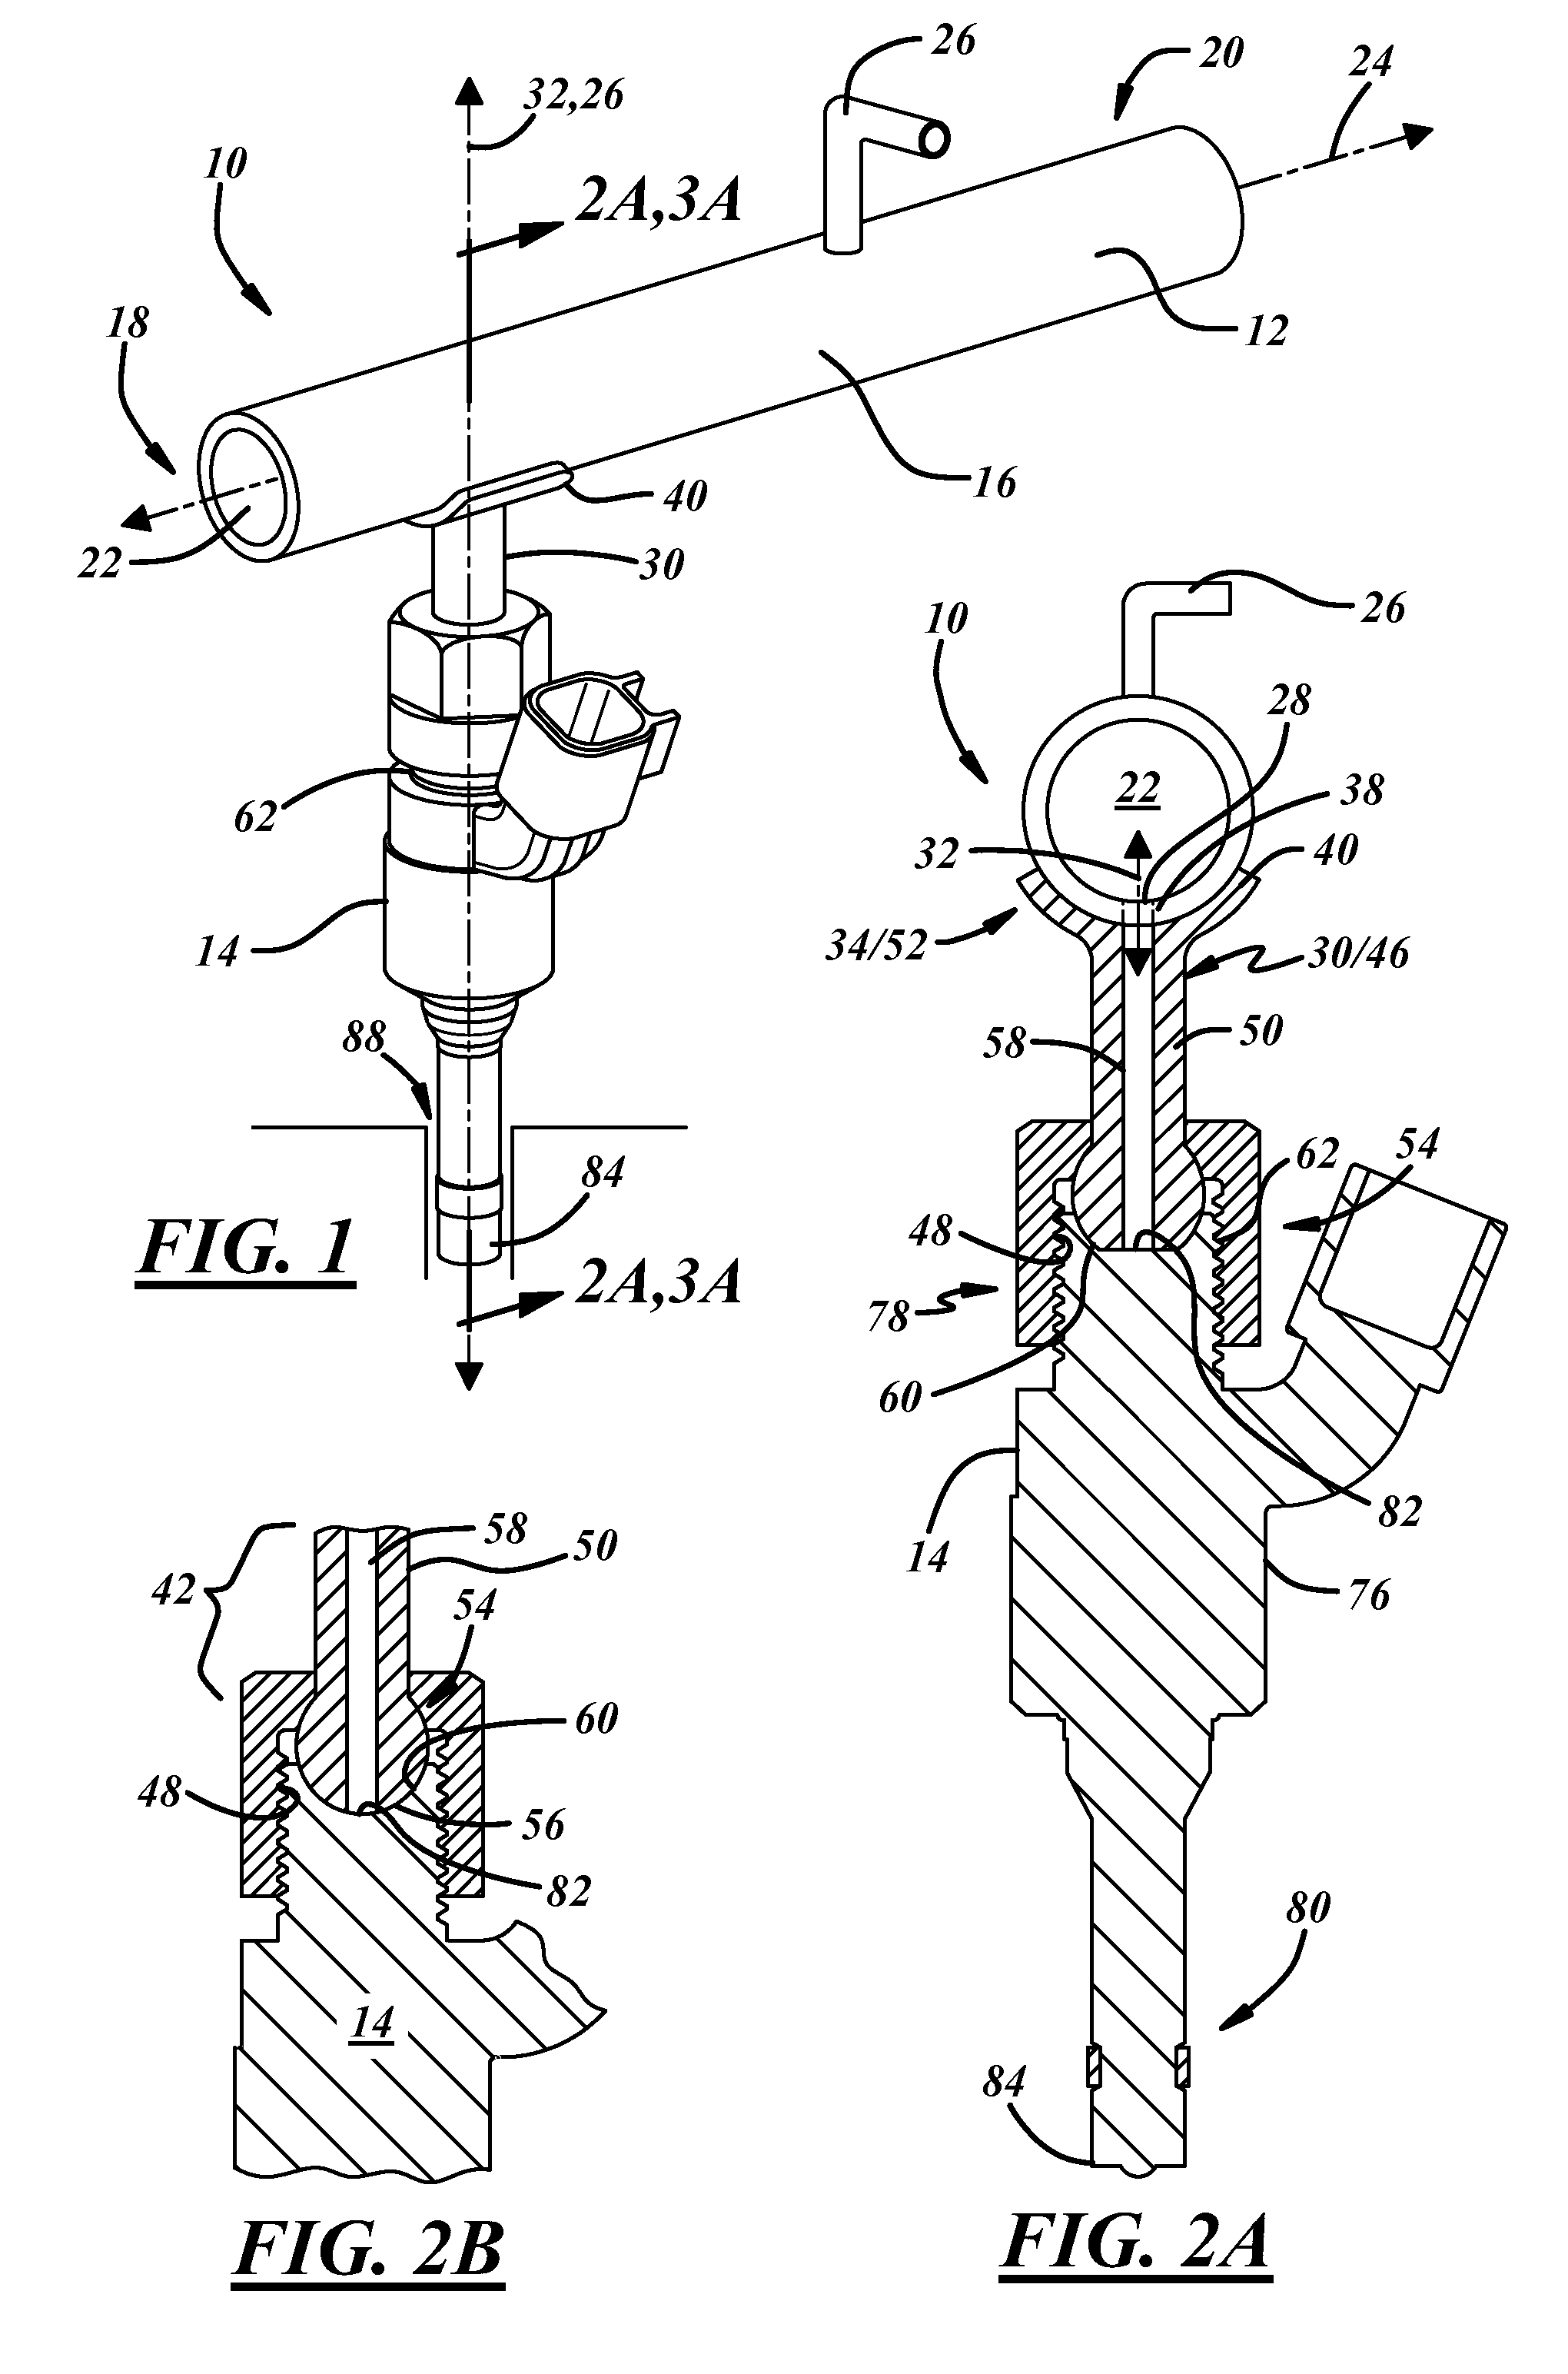 Attachment for fuel injectors in a fuel delivery system